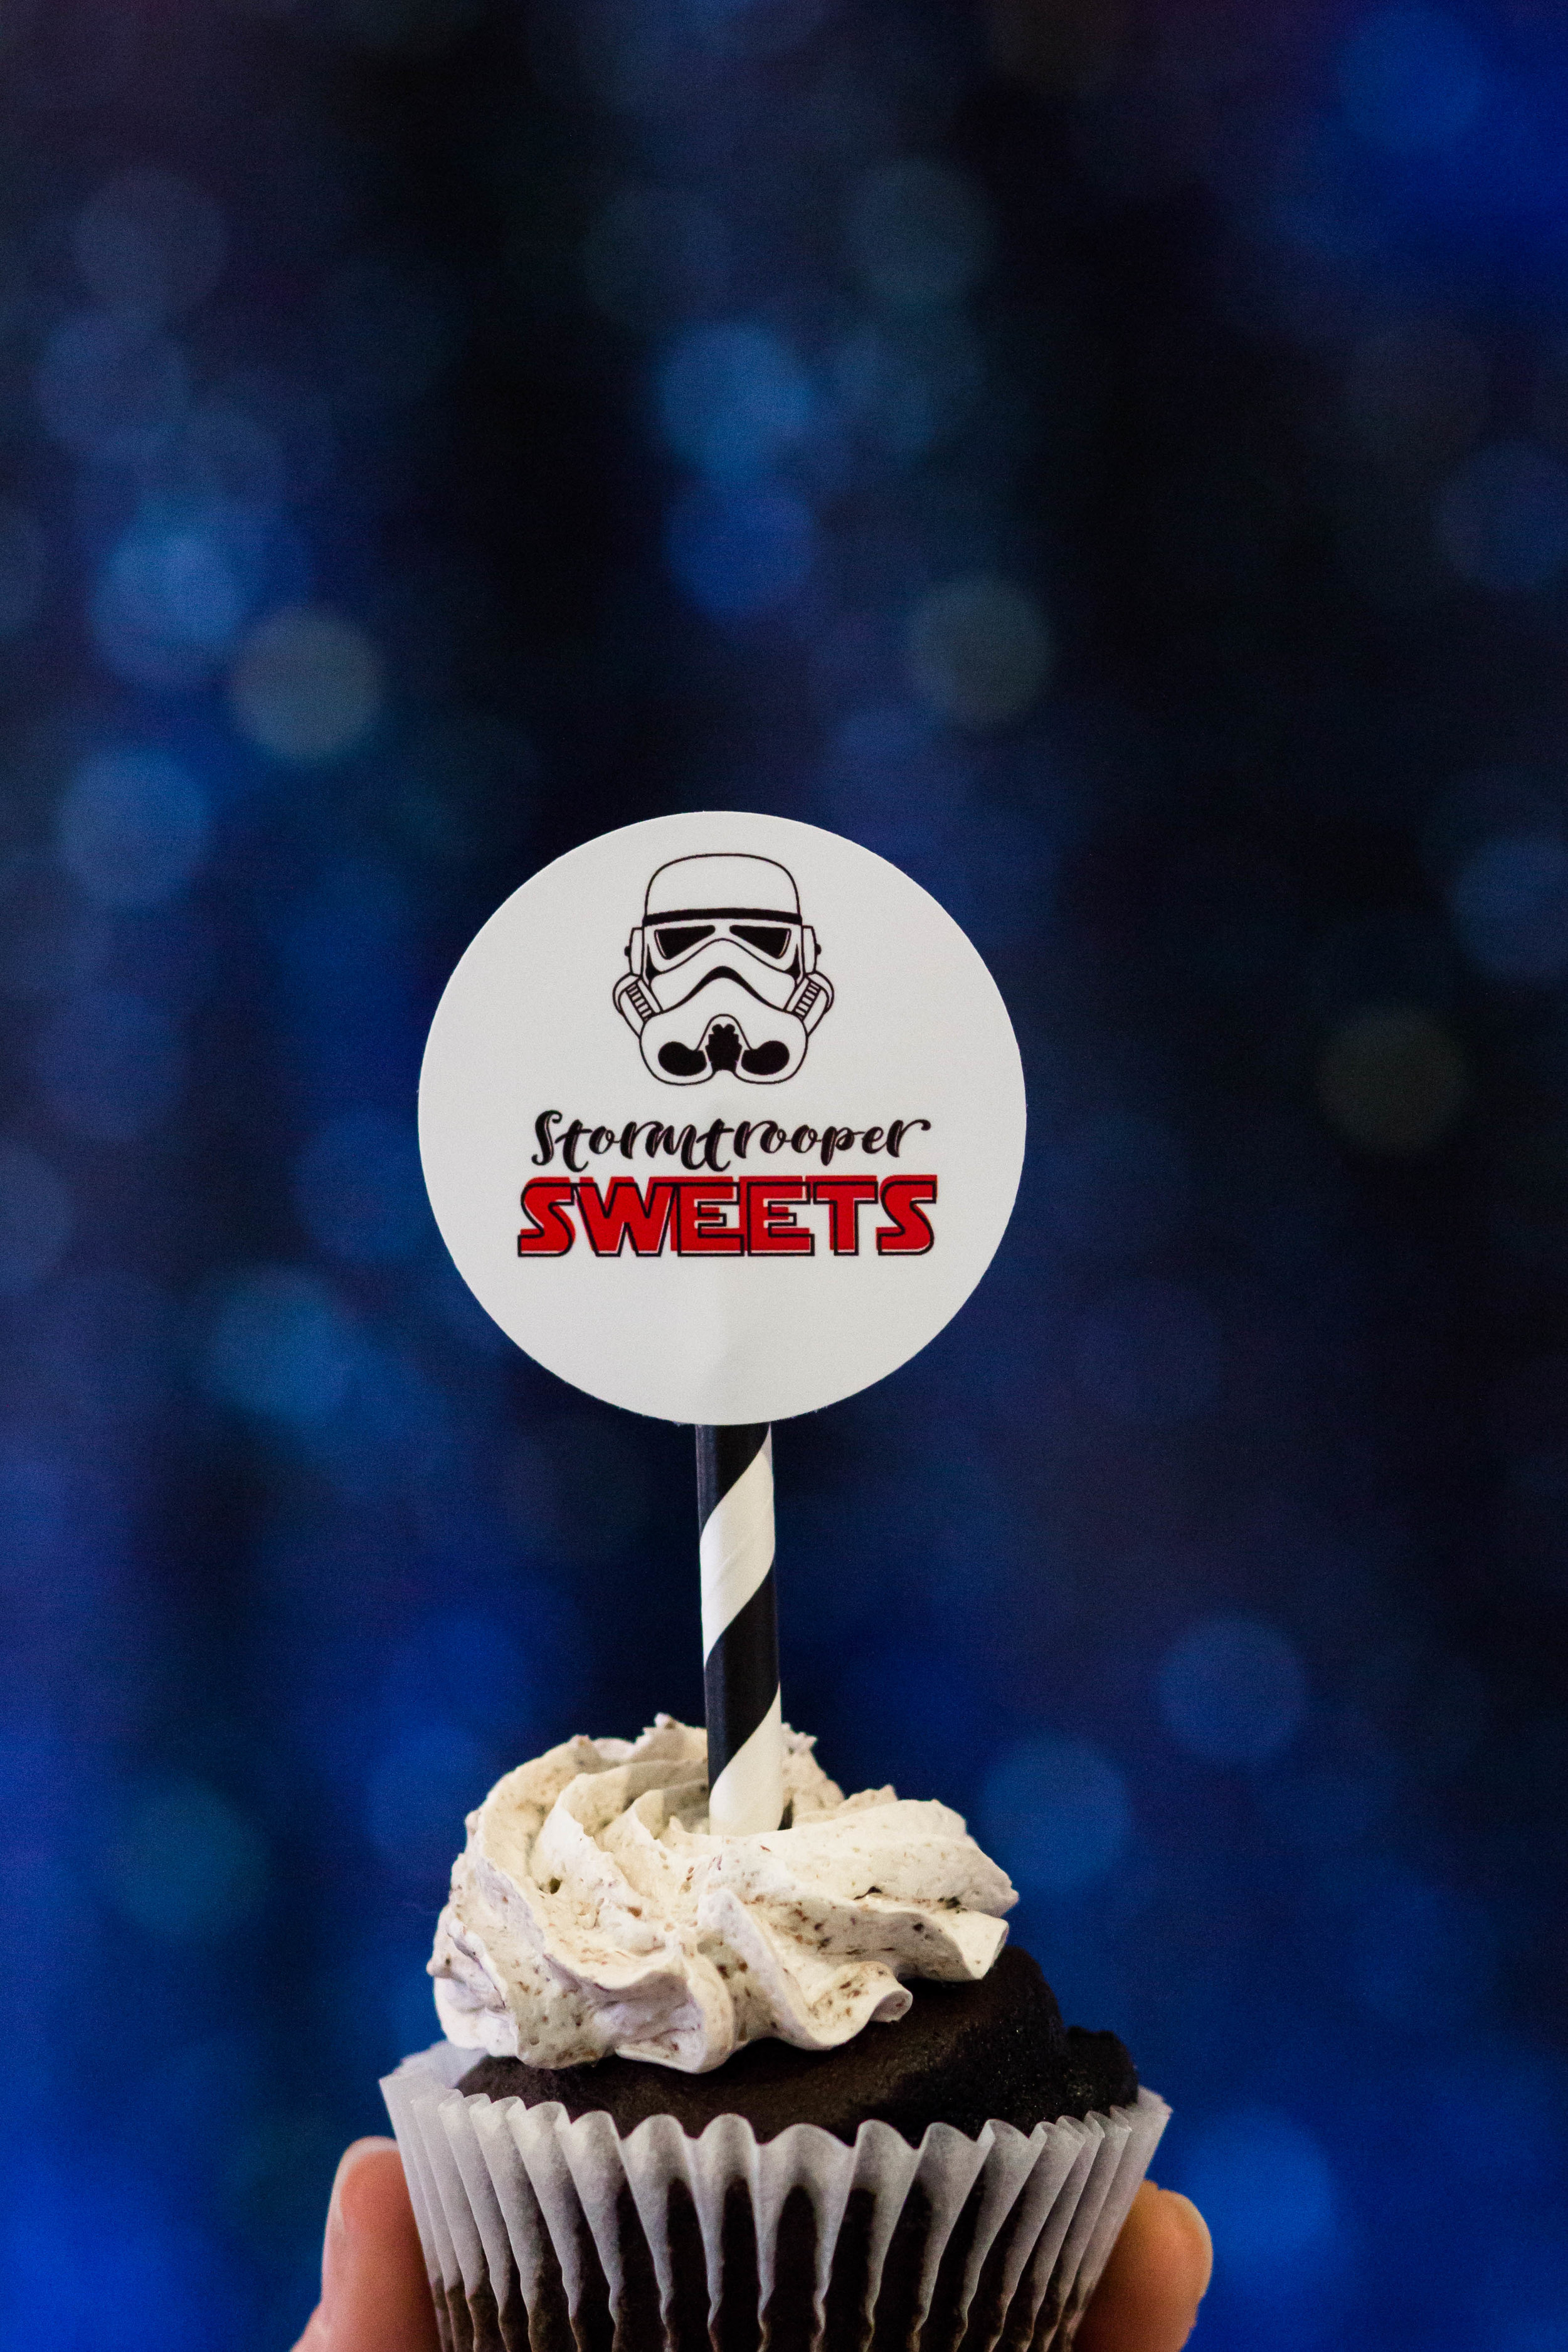 Stormtrooper Cupcakes at a Star Wars Birthday party // printables from shopmkkm.com